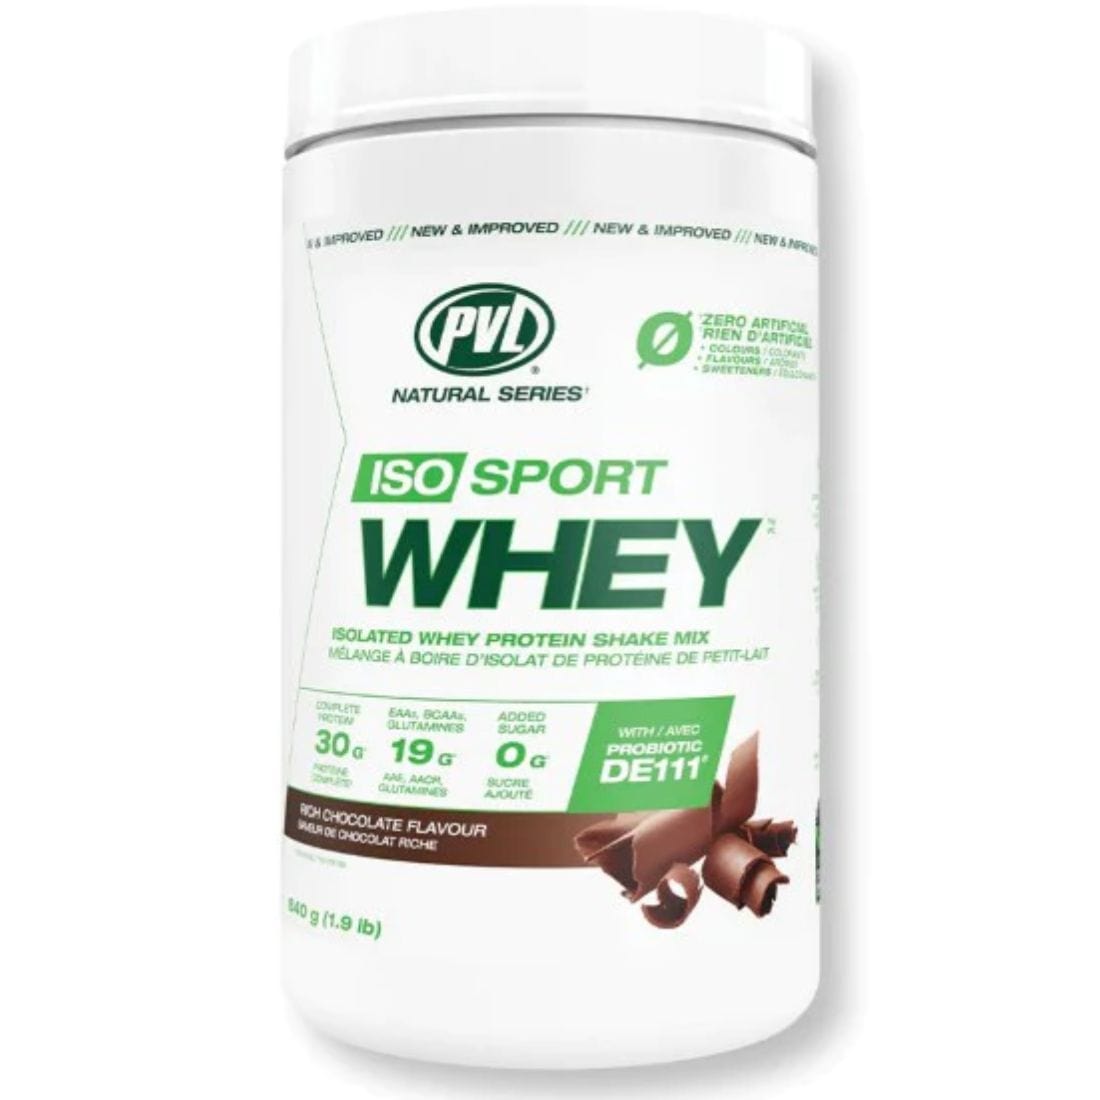 PVL 100% Natural Iso Sport Whey Isolate, Grass Fed